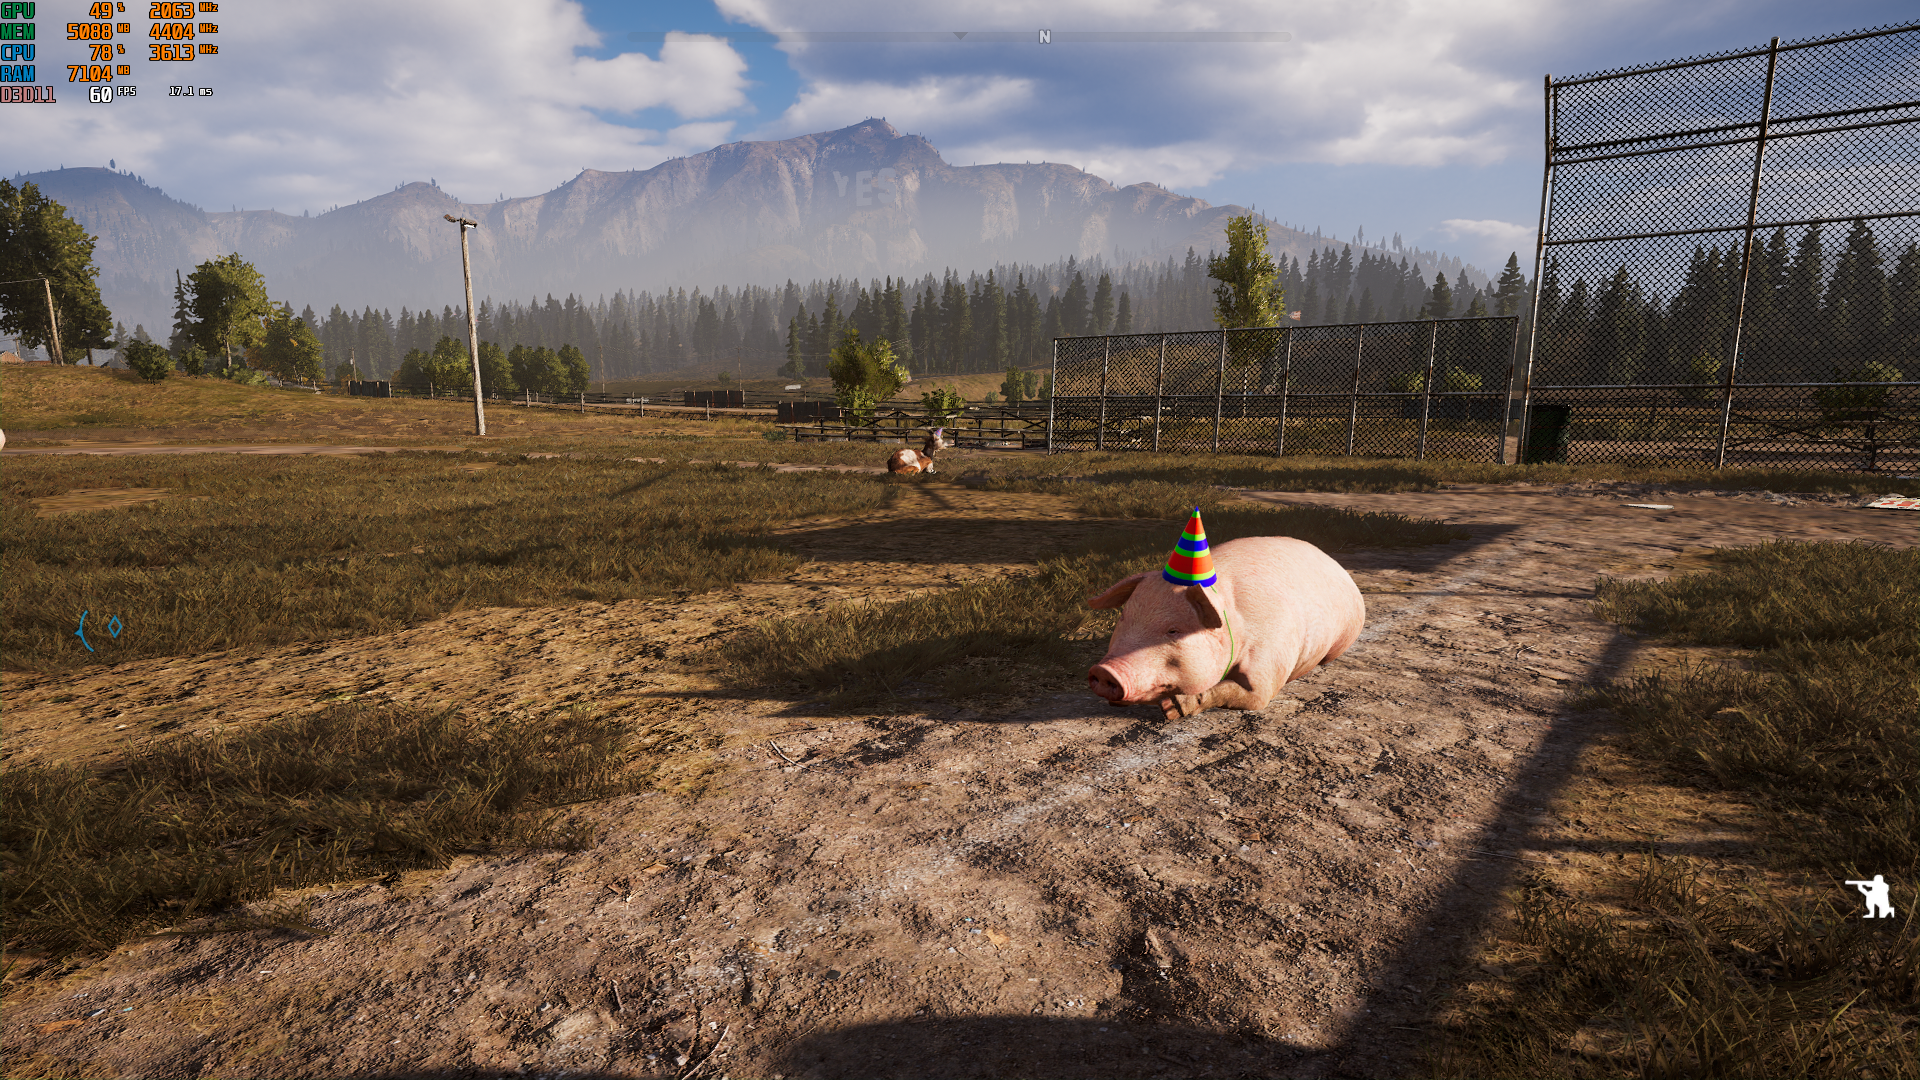 farcry5screenshot201803ppr.png